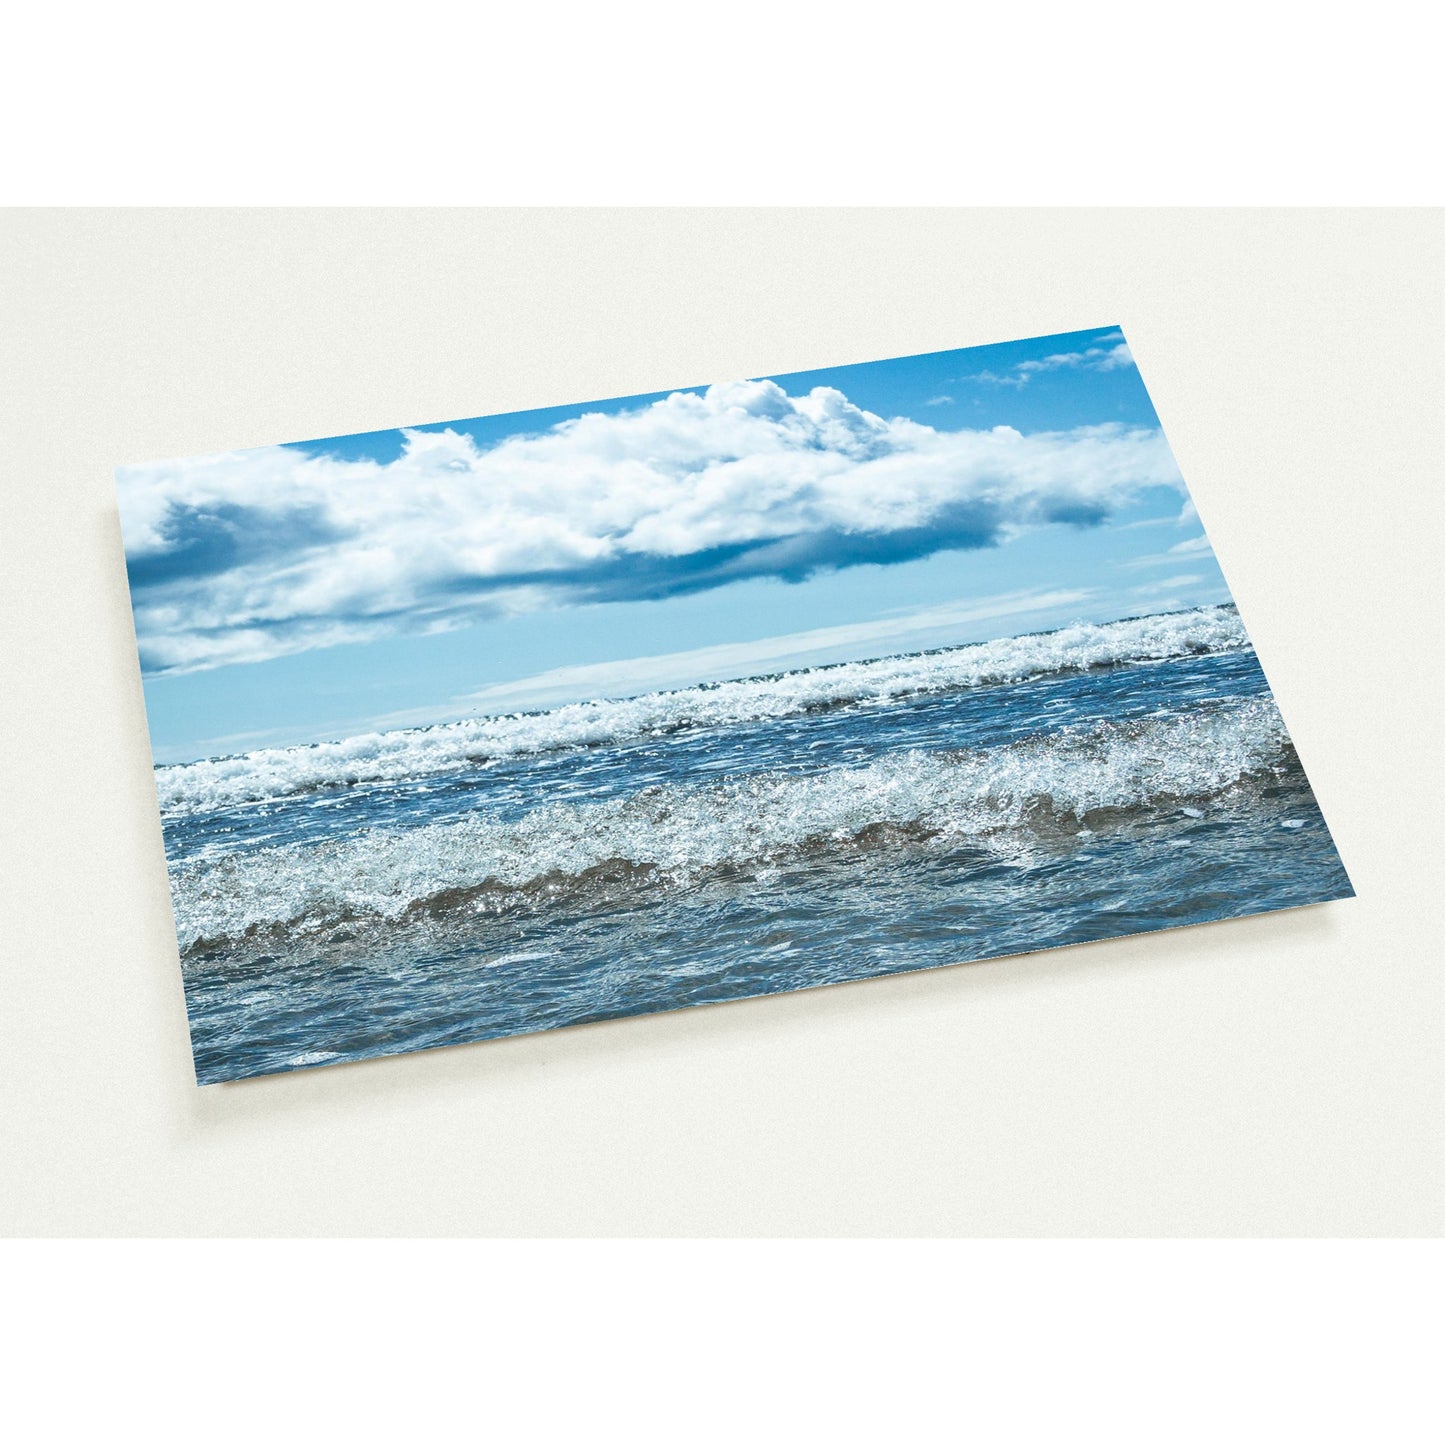 Sea Sounds Greeting Card Set with 10 Cards (2-Sided, with Envelopes)